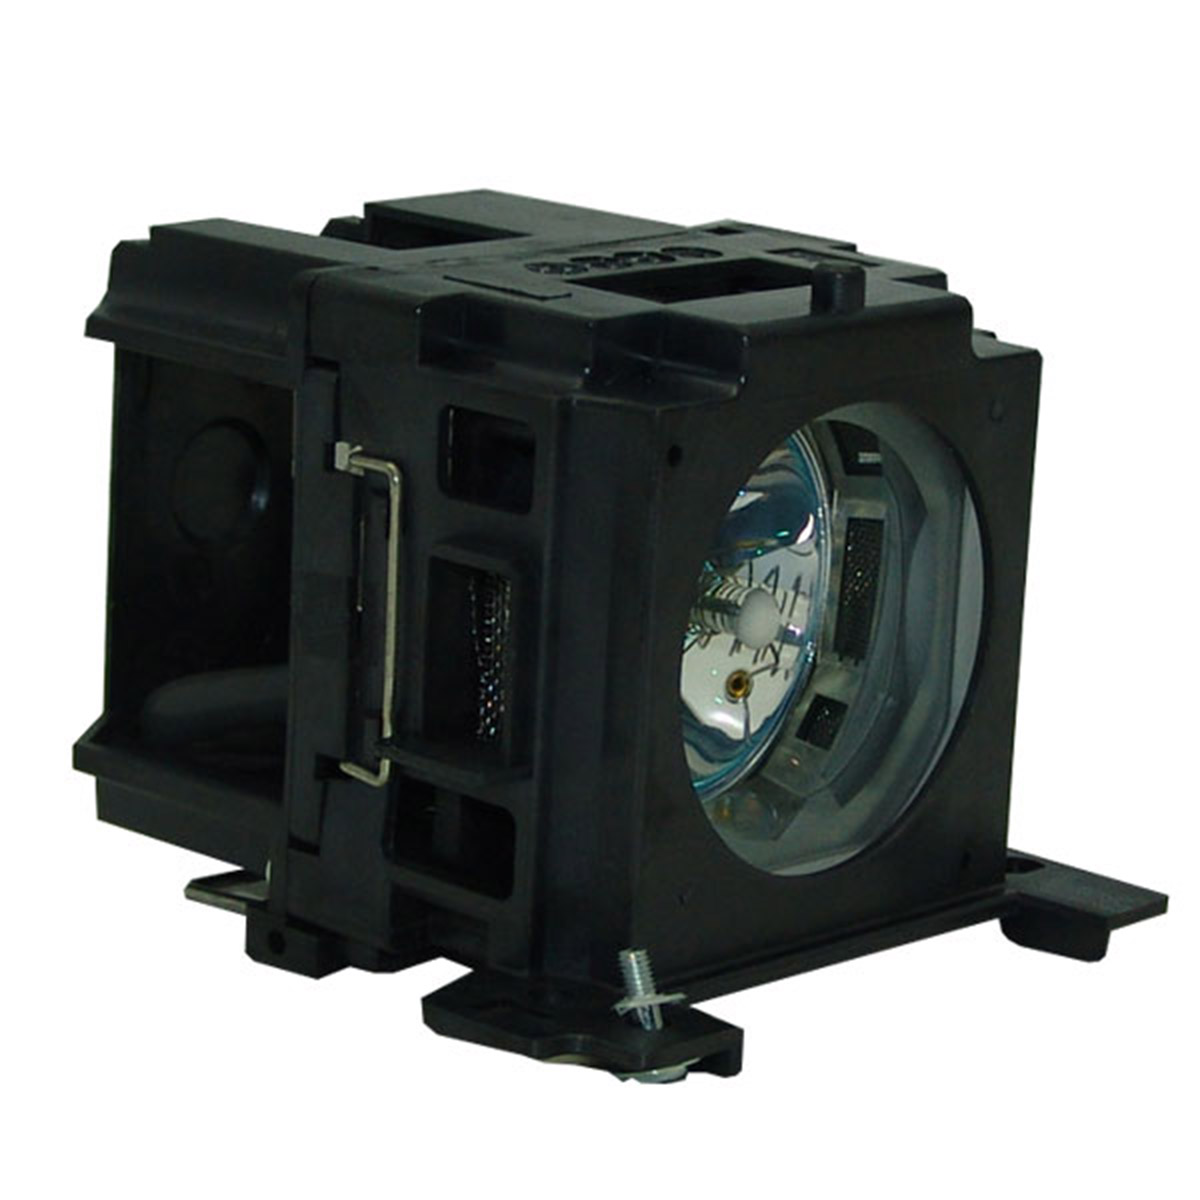 Lamp & Housing for the Dukane Image Pro 8755D-RJ Projector - 90 Day Warranty - image 3 of 4